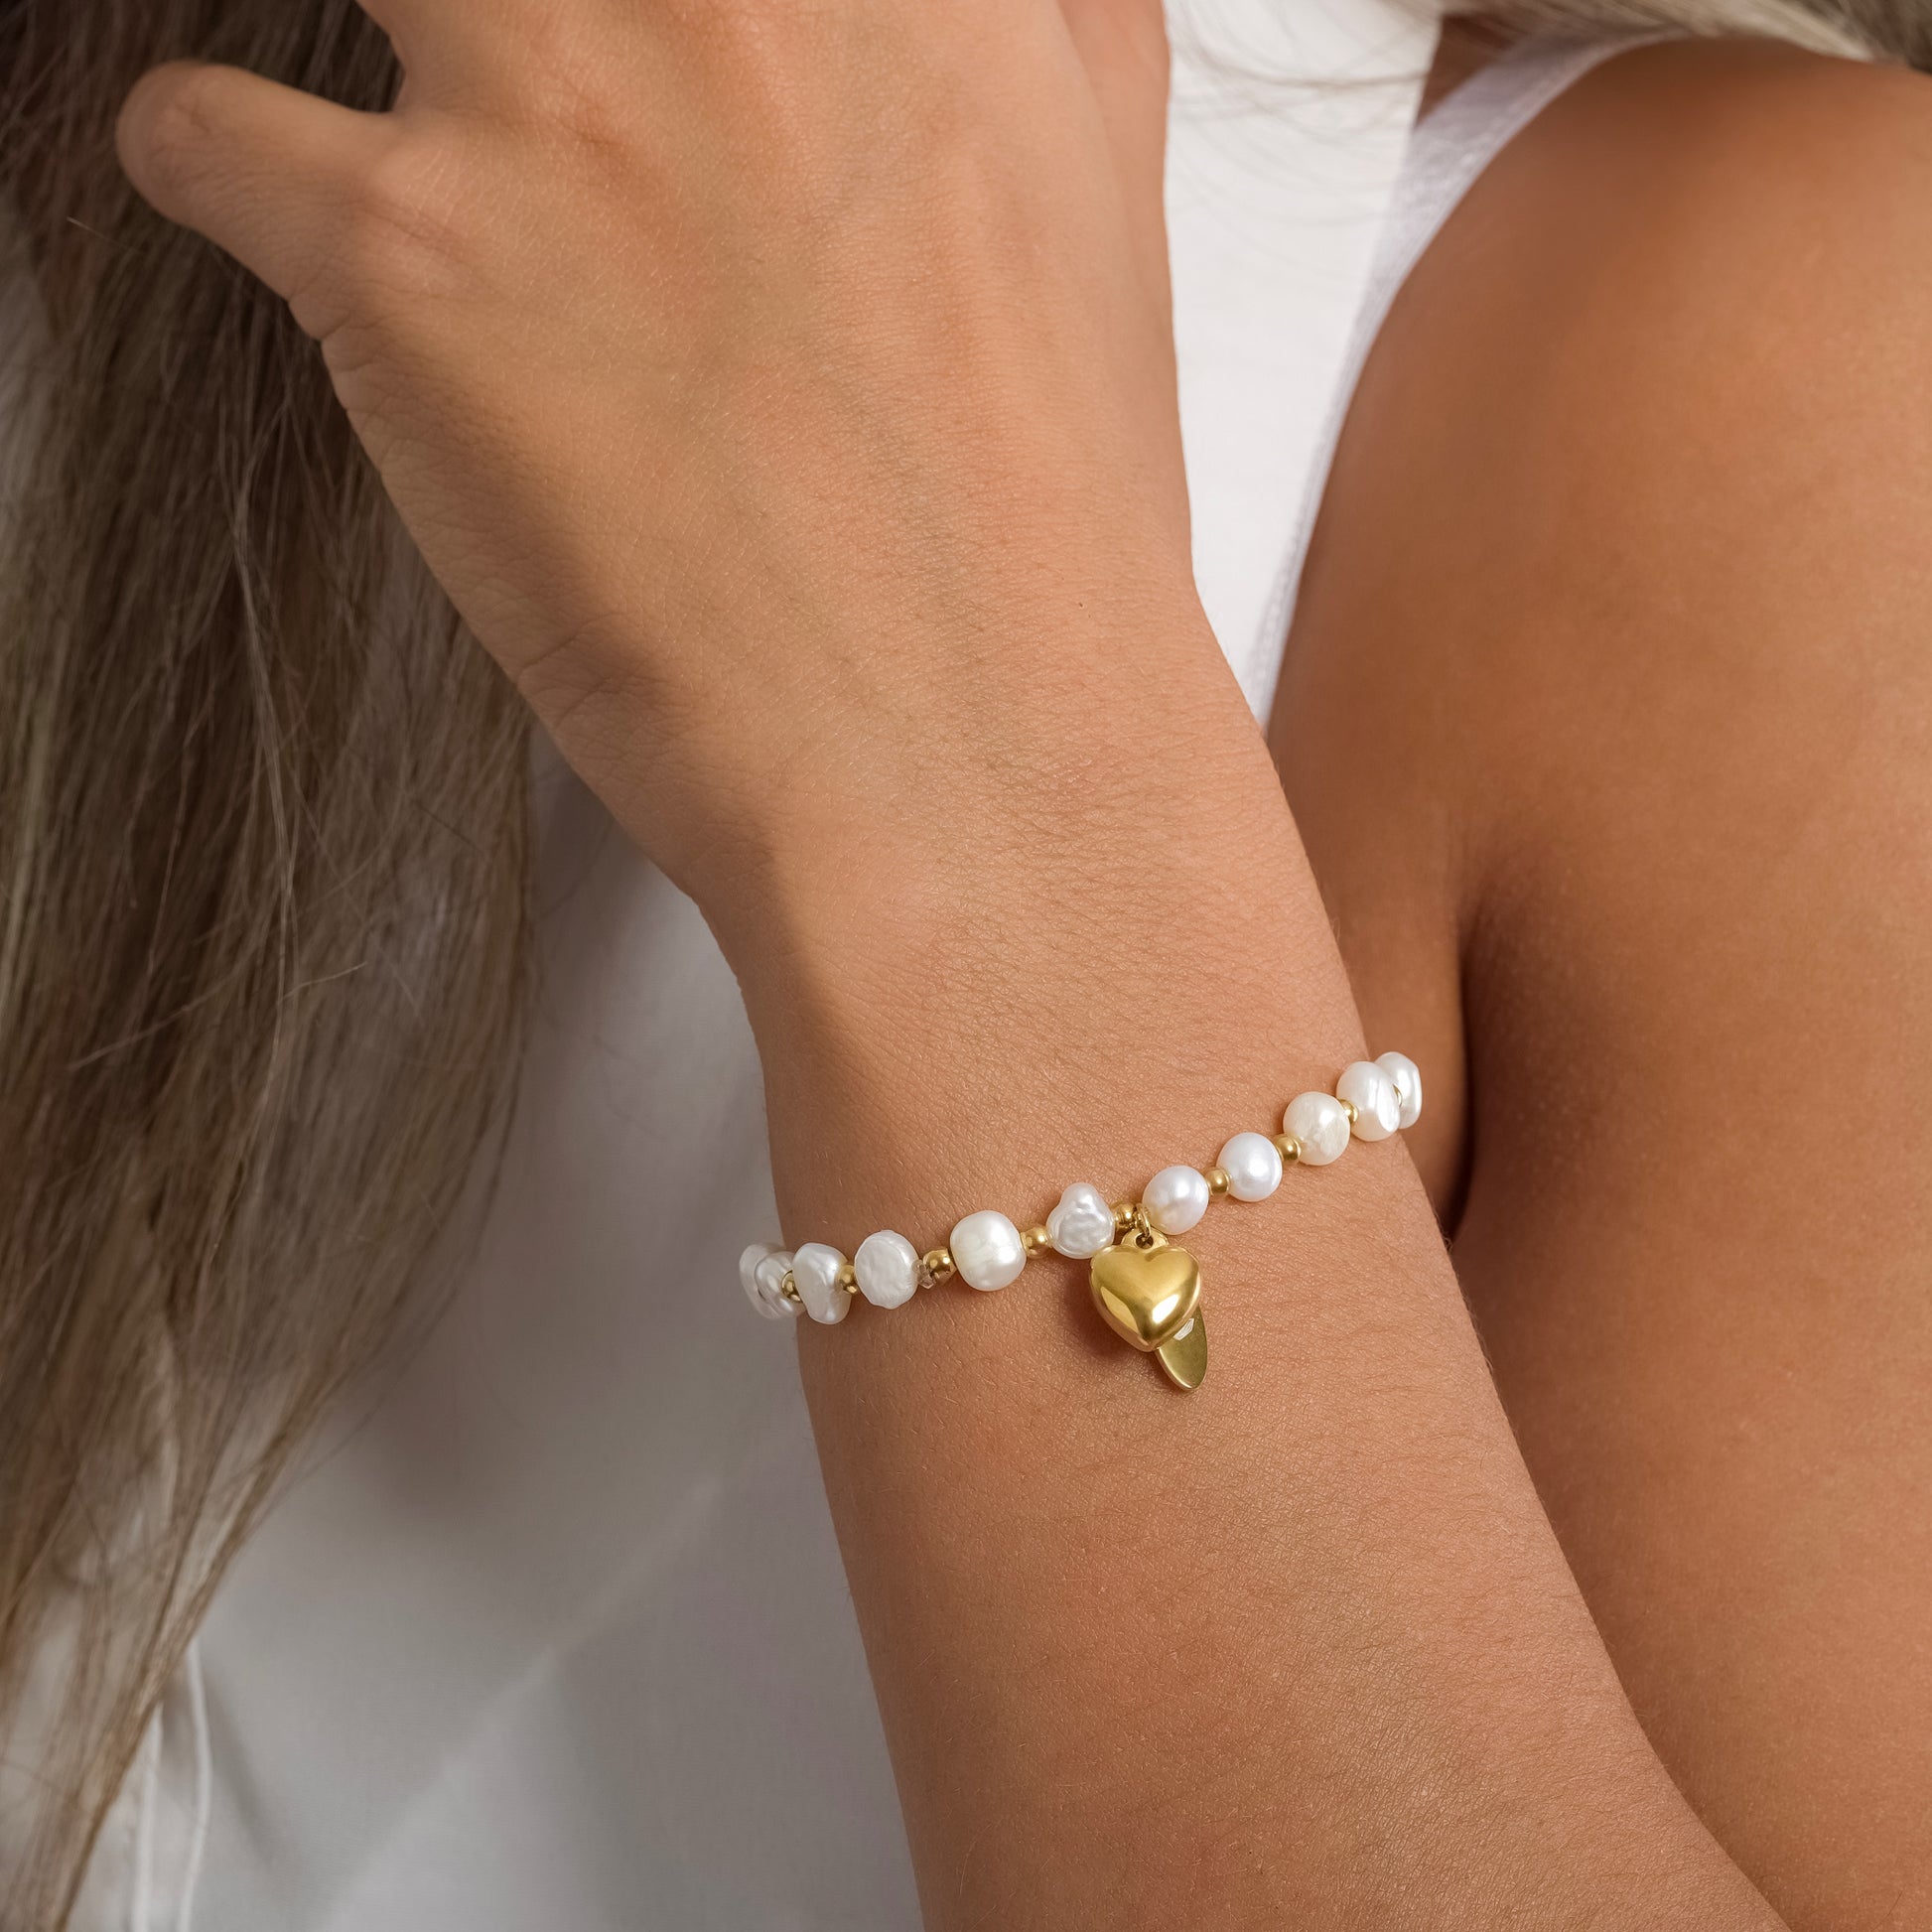 A model in a white sleeveless top wearing Heart Beaded Pearl bracelet on her wrist. Close-up image of the bracelet.